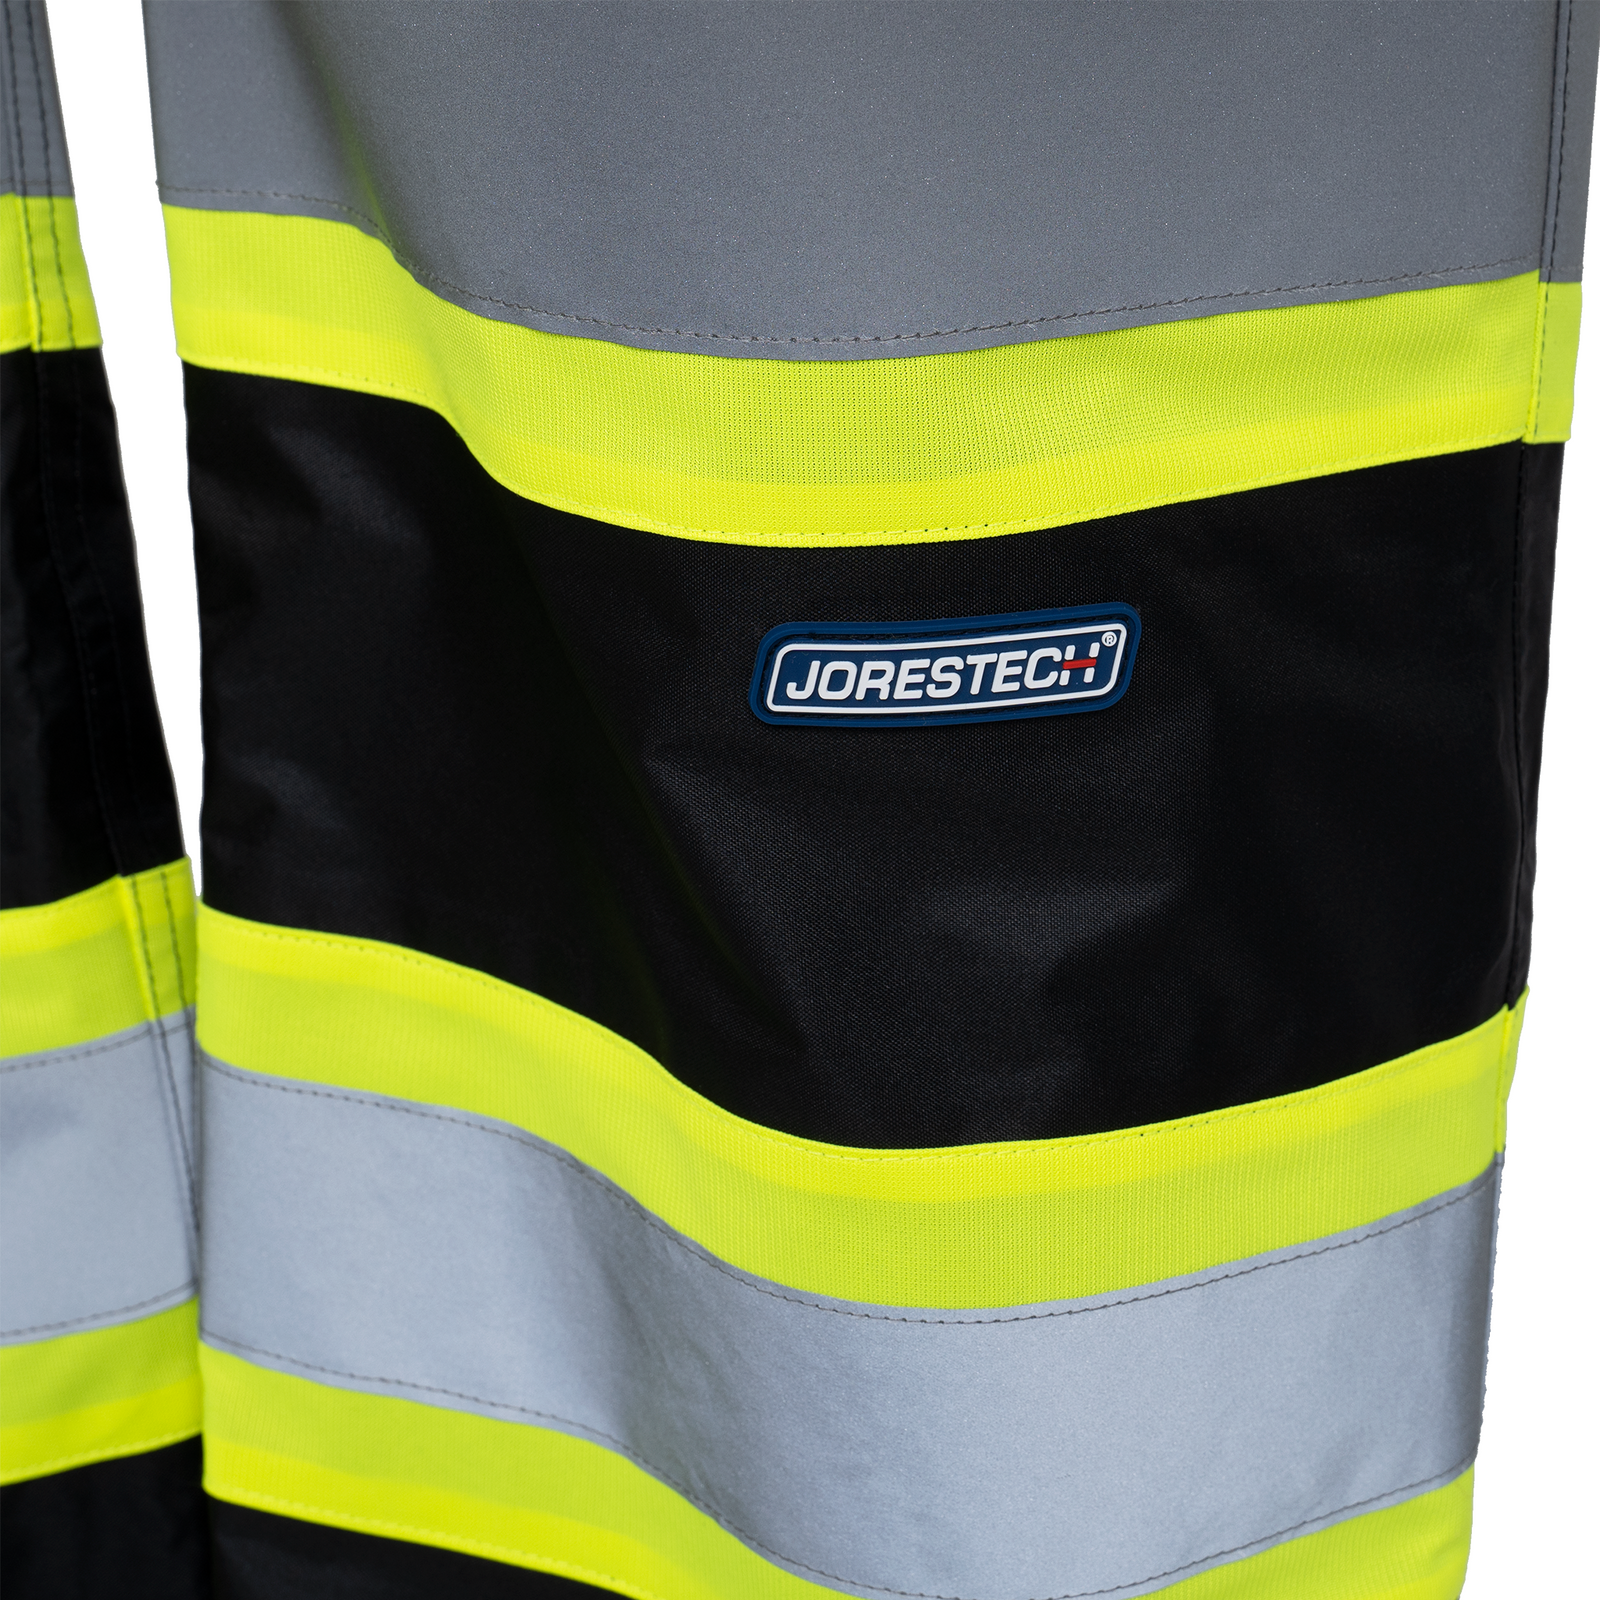 Hi vis two tone black safety rain pants with reflective and contrasting stripes